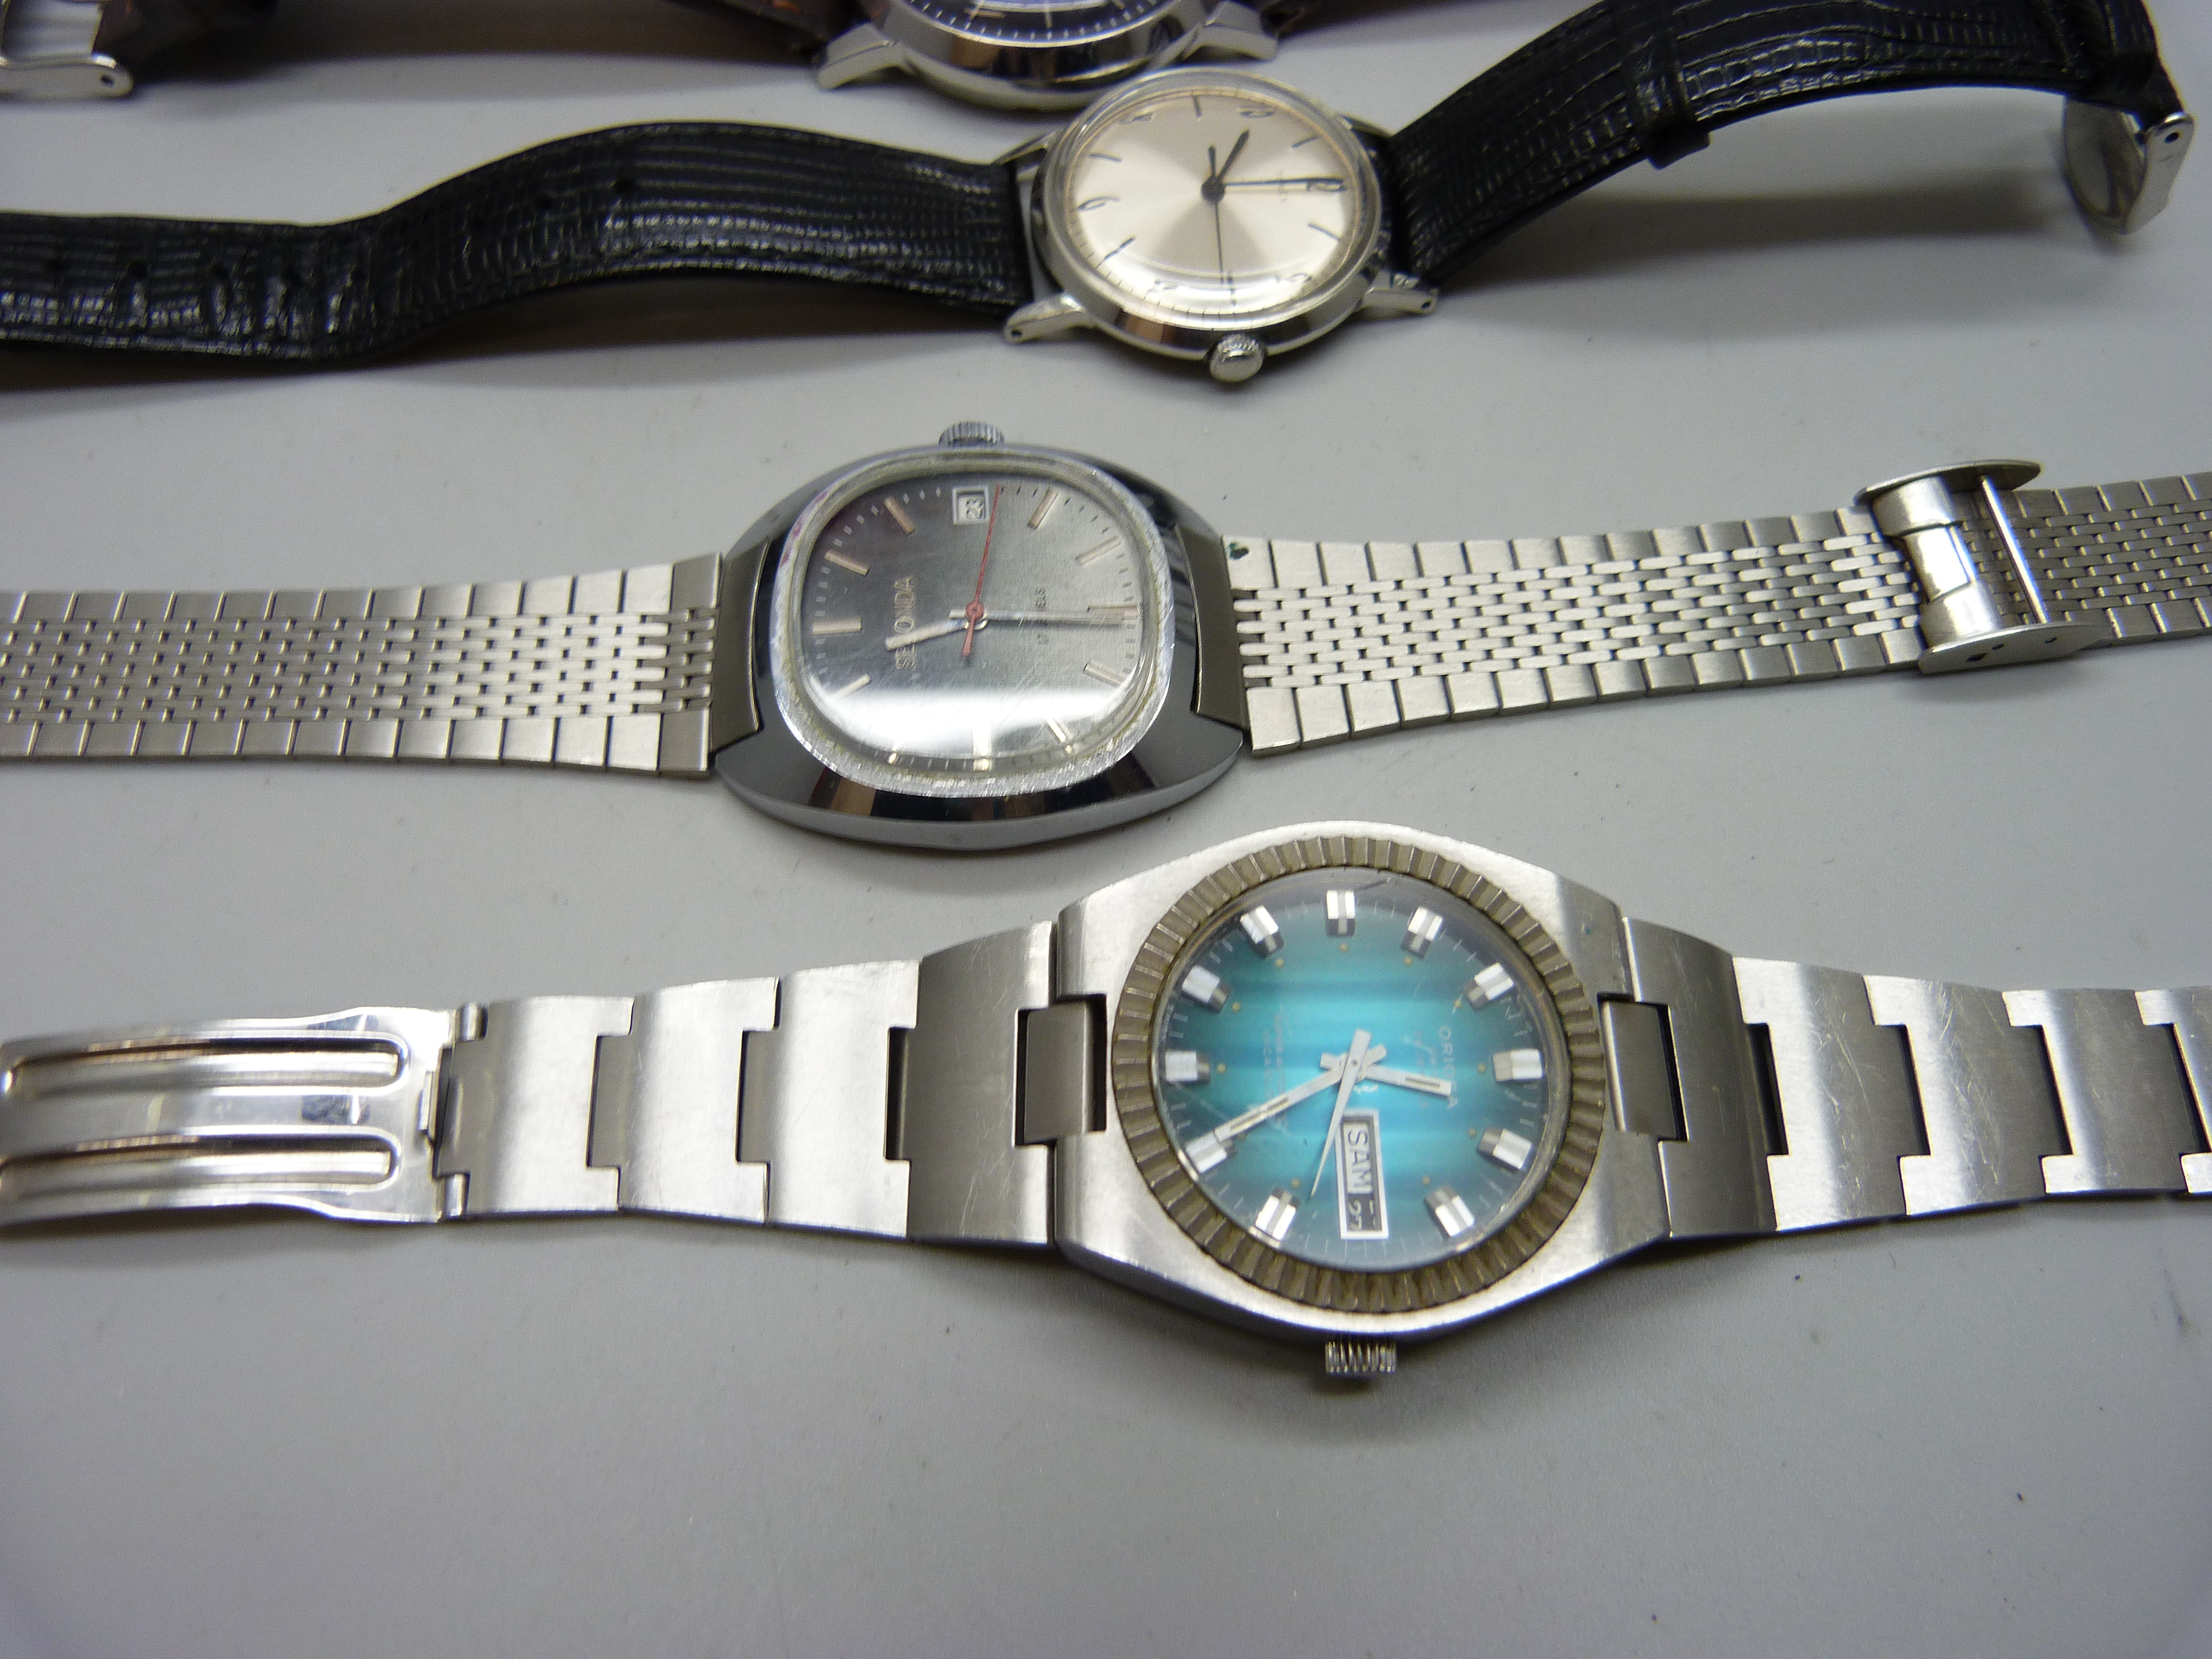 Six wristwatches - Seiko, Oriosa Super Automatic, Sekonda, Consul, Timex Marlin and one other Timex - Image 4 of 4